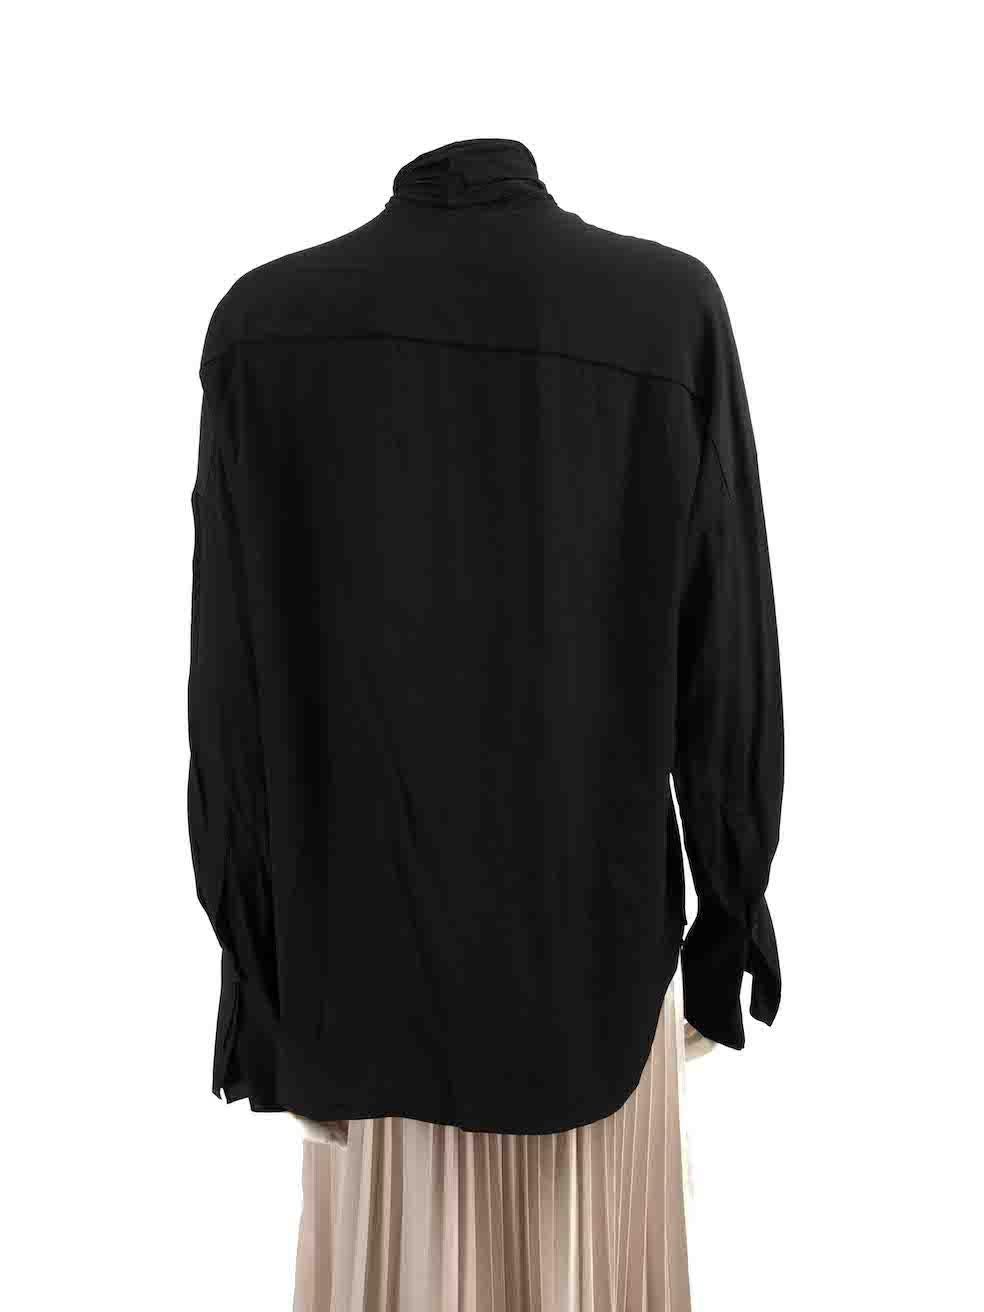 Chloé Black Silk Pussy Bow Blouse Size L In Good Condition For Sale In London, GB